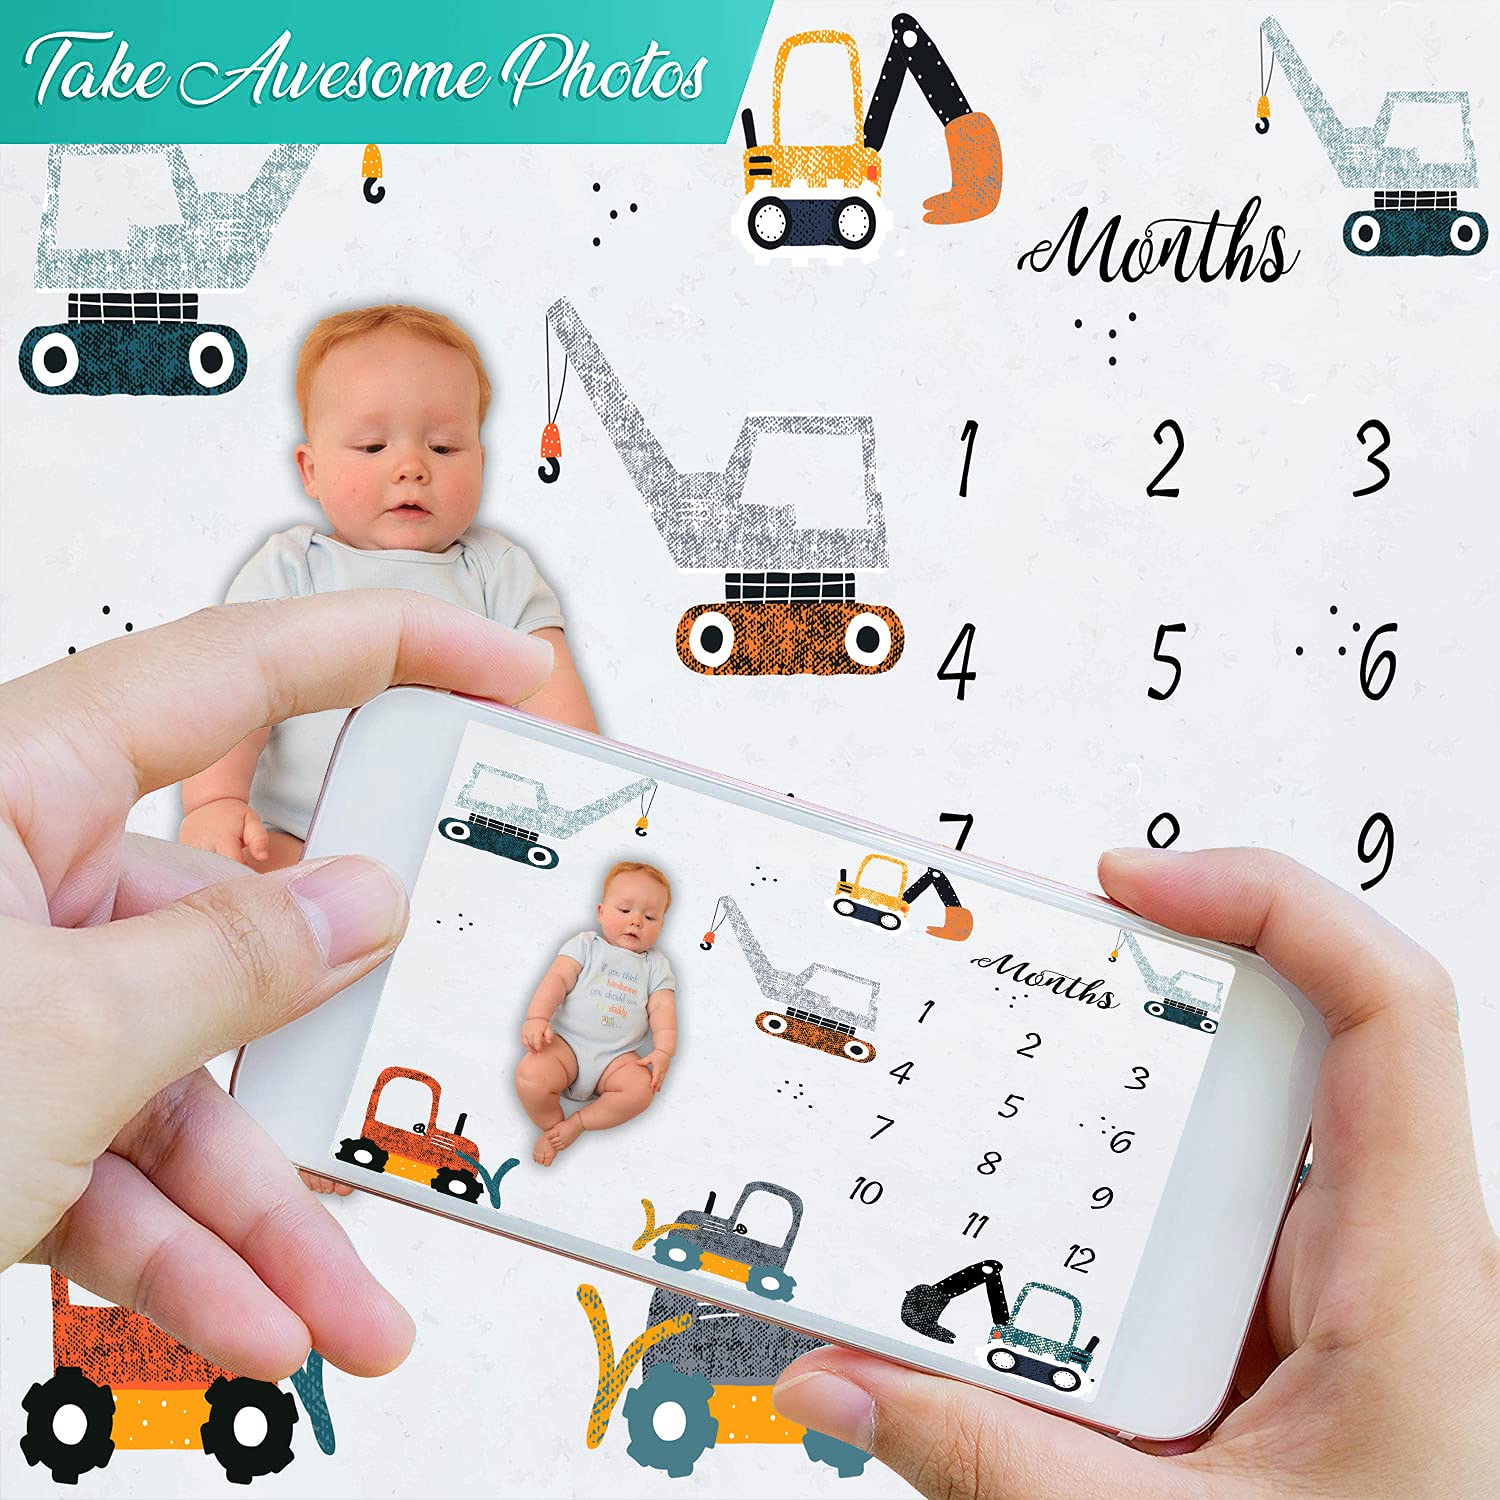 EARVO Baby Monthly Milestone Blanket Boy or Girl Construction Truck Baby Month Blanket with Wreath Frame Cartoon Truck Milestone Blanket for Newborn to 12 Months Milestones 47”x40”BTZDEA8